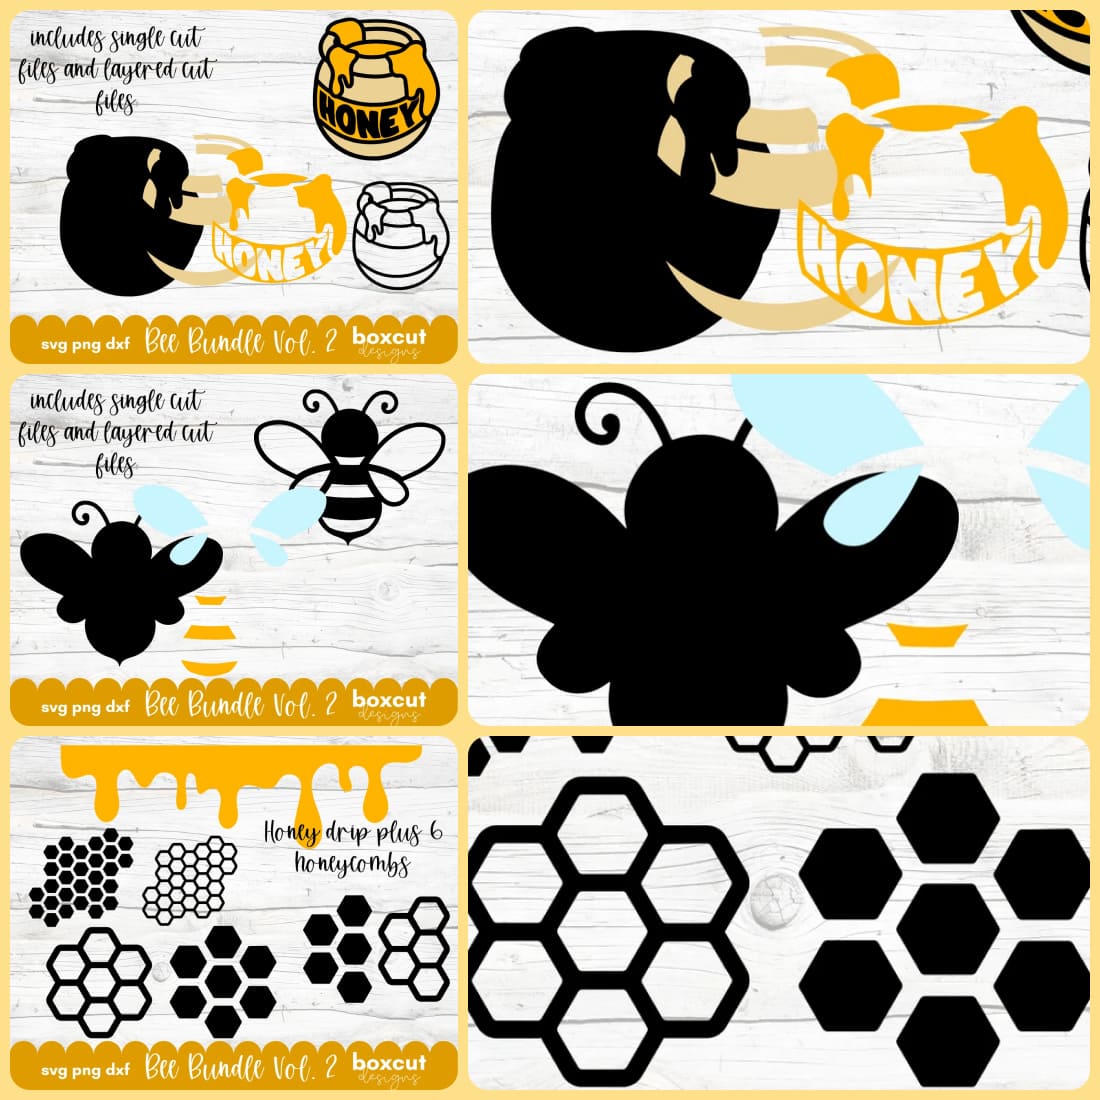 Honeycomb SVG - great Example of colorful Images.